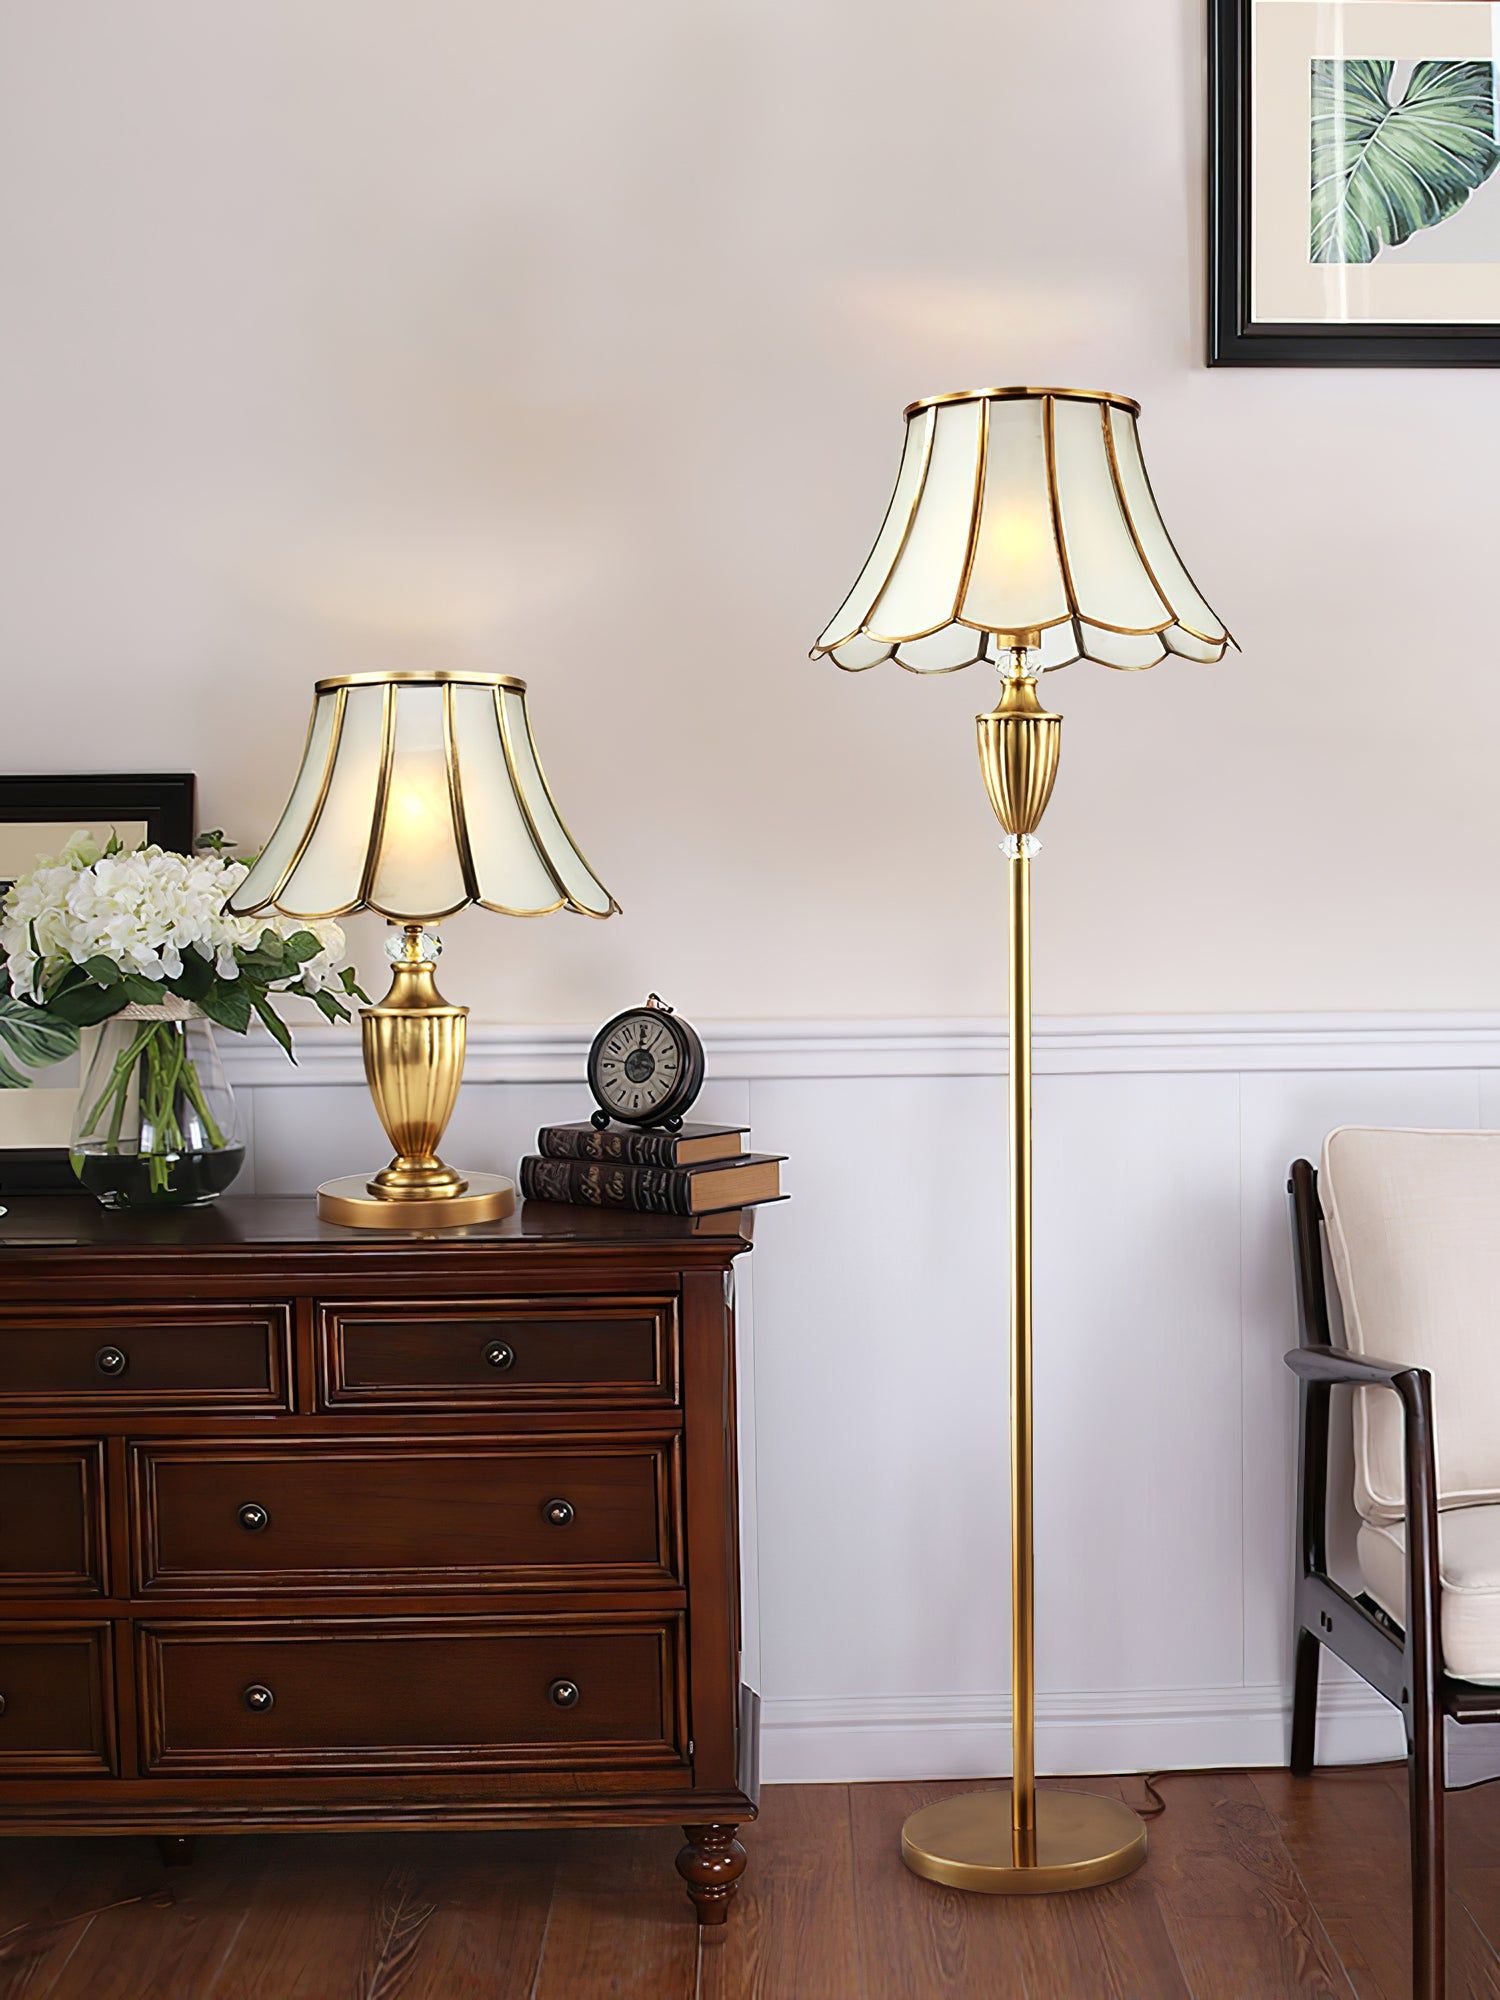 Antique Floor Lamps : Stunning Antique Floor Lamps Enhance Any Room with Style